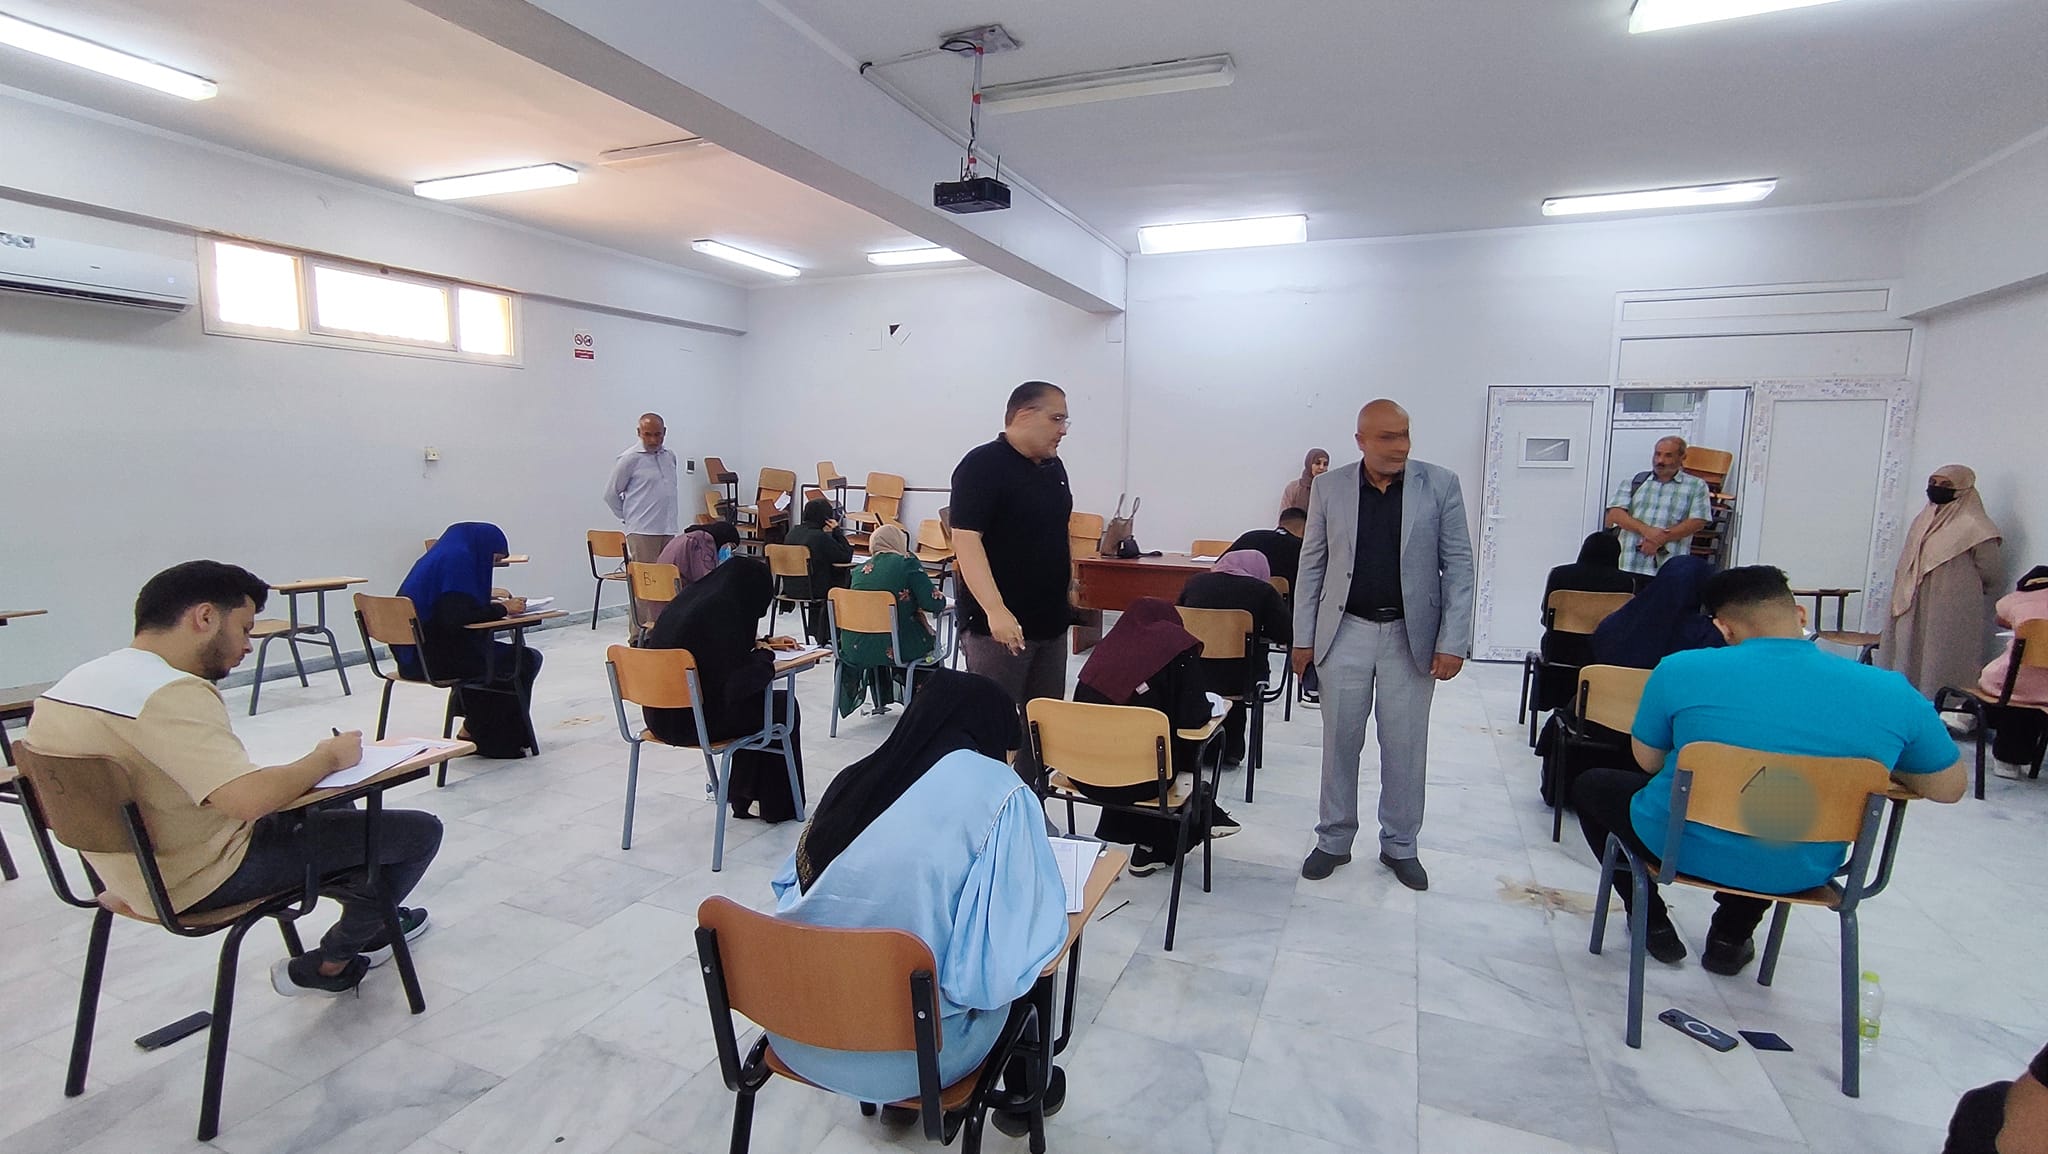 General Registrar of Sabratha University, accompanied by the Director of the Study and Examinations Office in the General Registrar’s Department
